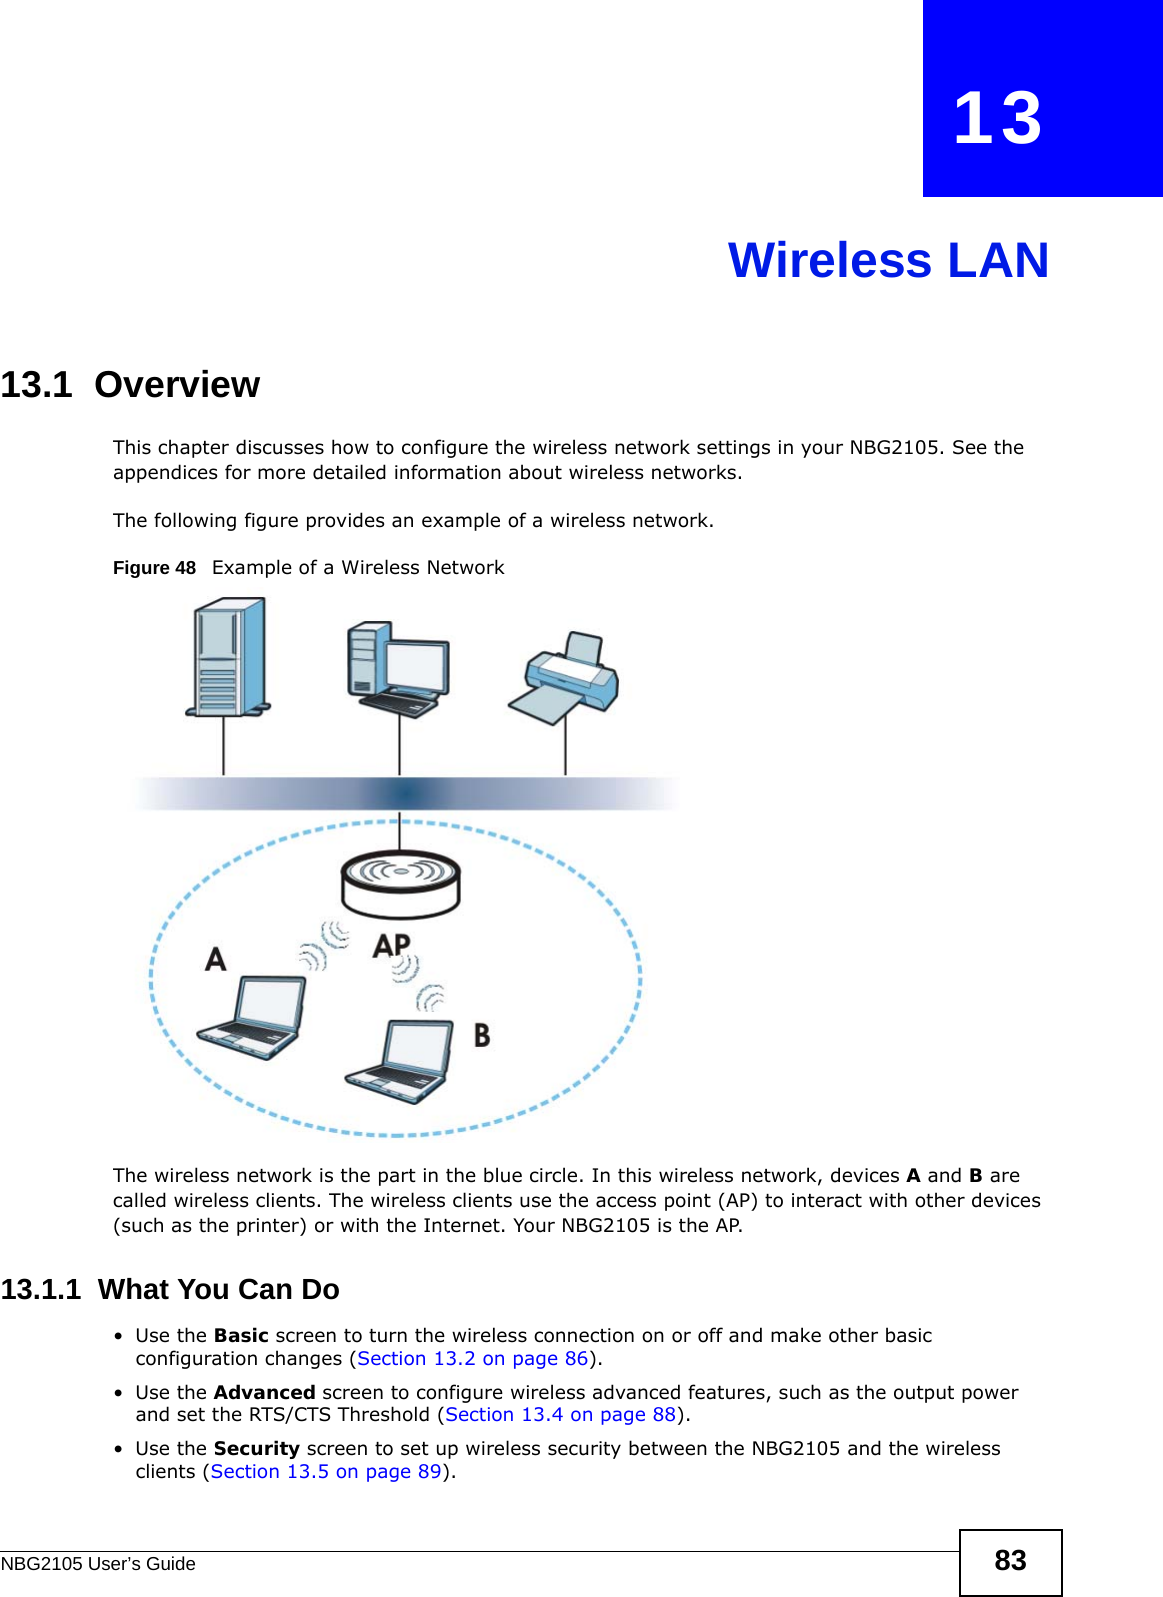 NBG2105 User’s Guide 83CHAPTER   13Wireless LAN13.1  OverviewThis chapter discusses how to configure the wireless network settings in your NBG2105. See the appendices for more detailed information about wireless networks.The following figure provides an example of a wireless network.Figure 48   Example of a Wireless NetworkThe wireless network is the part in the blue circle. In this wireless network, devices A and B are called wireless clients. The wireless clients use the access point (AP) to interact with other devices (such as the printer) or with the Internet. Your NBG2105 is the AP.13.1.1  What You Can Do•Use the Basic screen to turn the wireless connection on or off and make other basic configuration changes (Section 13.2 on page 86).•Use the Advanced screen to configure wireless advanced features, such as the output power and set the RTS/CTS Threshold (Section 13.4 on page 88).•Use the Security screen to set up wireless security between the NBG2105 and the wireless clients (Section 13.5 on page 89).